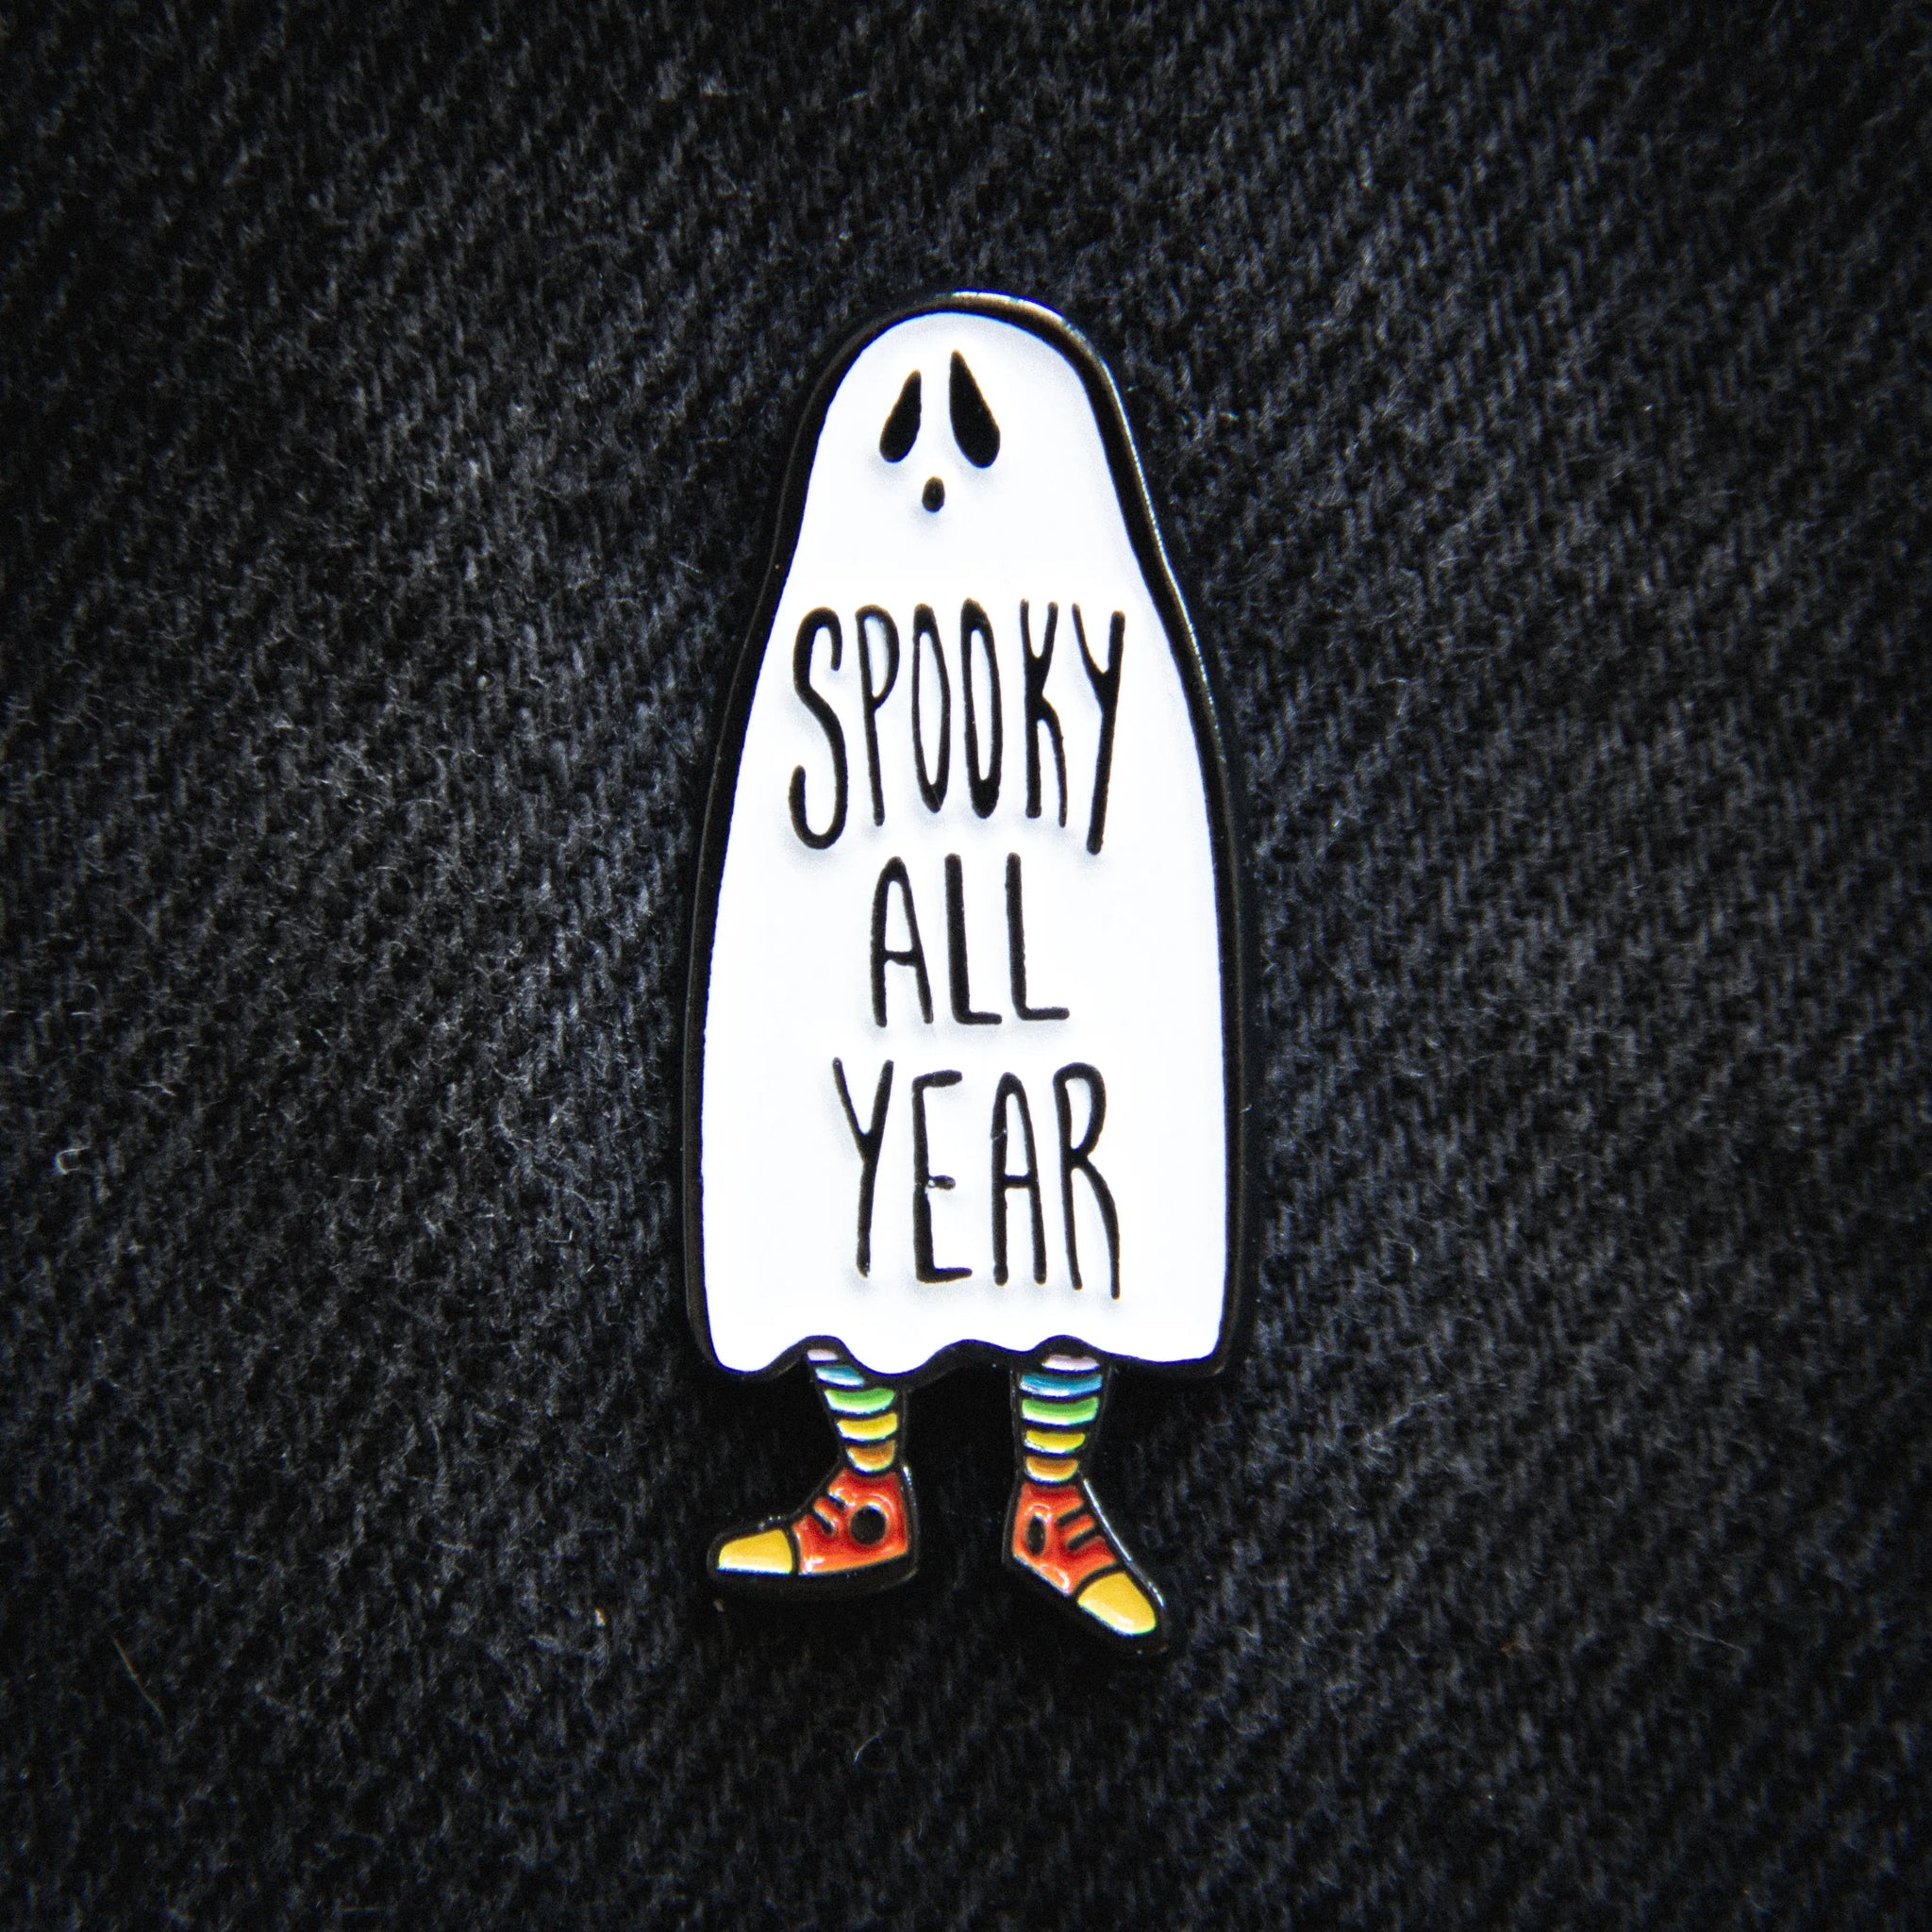 An enamel pin of a ghost wearing rainbow socks and red high top sneakers. The words “SPOOKY ALL YEAR” are written across its middle